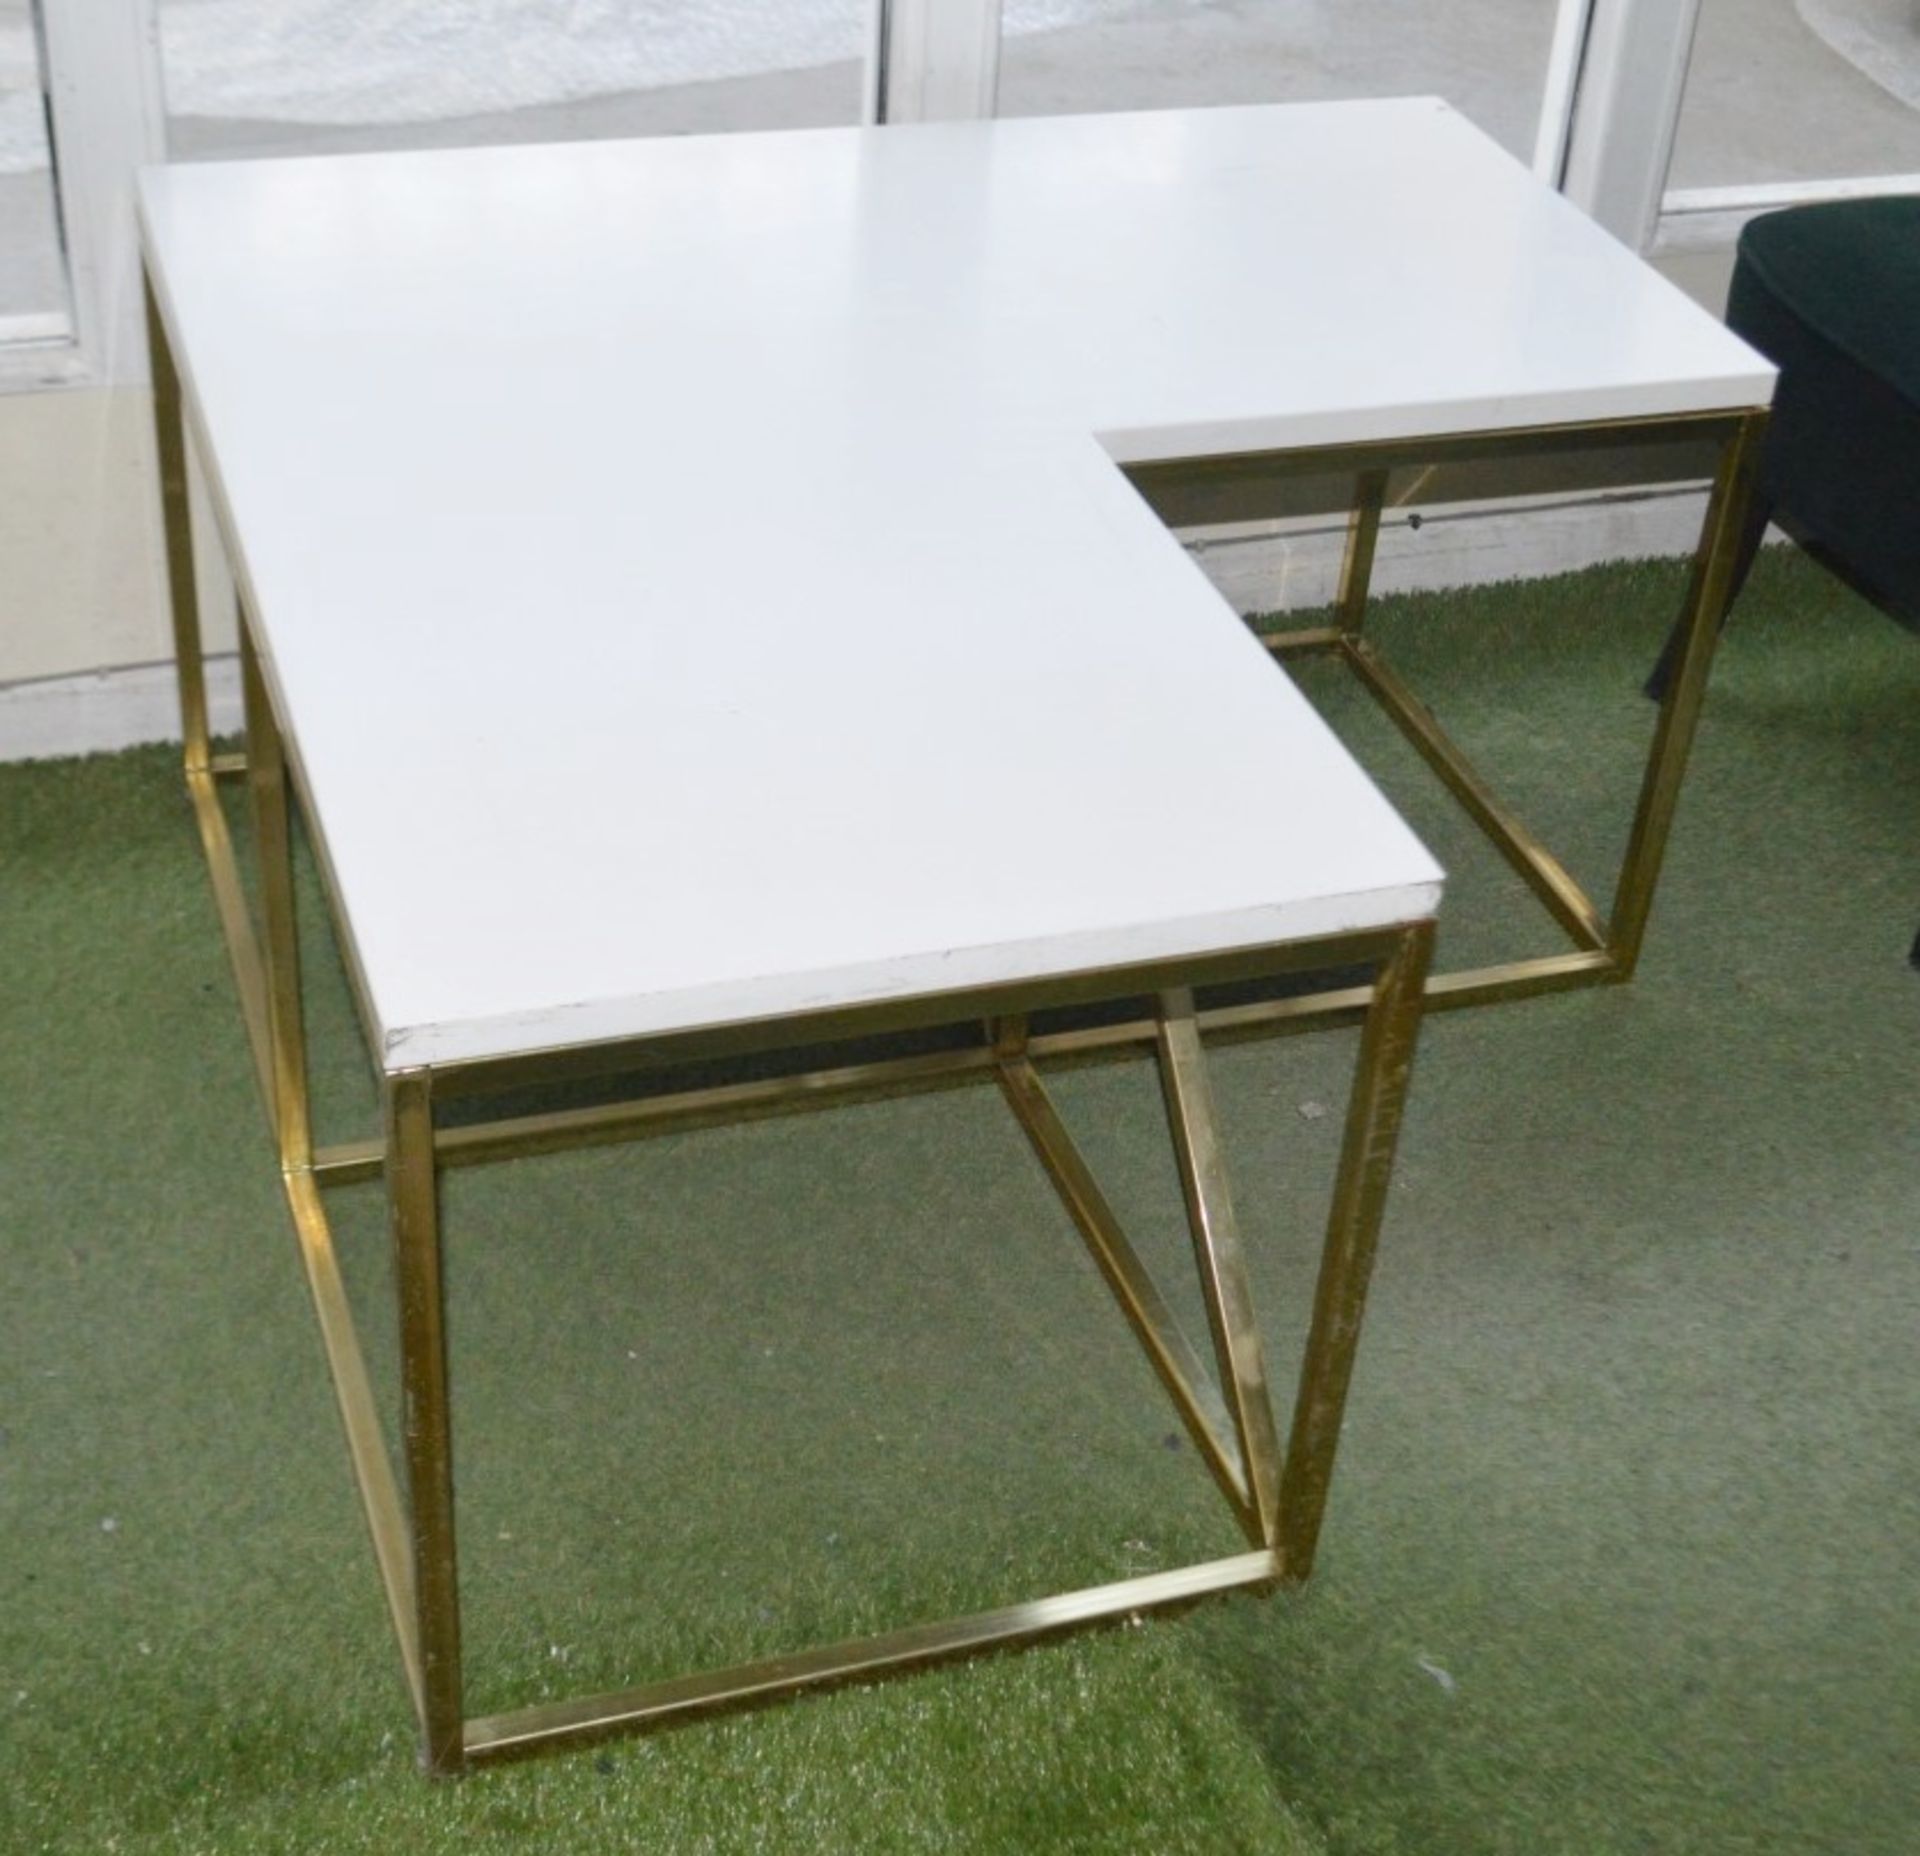 2 x Designer Display Tables With Gold Bases - Ex-Showroom Pieces - Ref: HAR120/121 GIT - CL987 - - Image 4 of 6